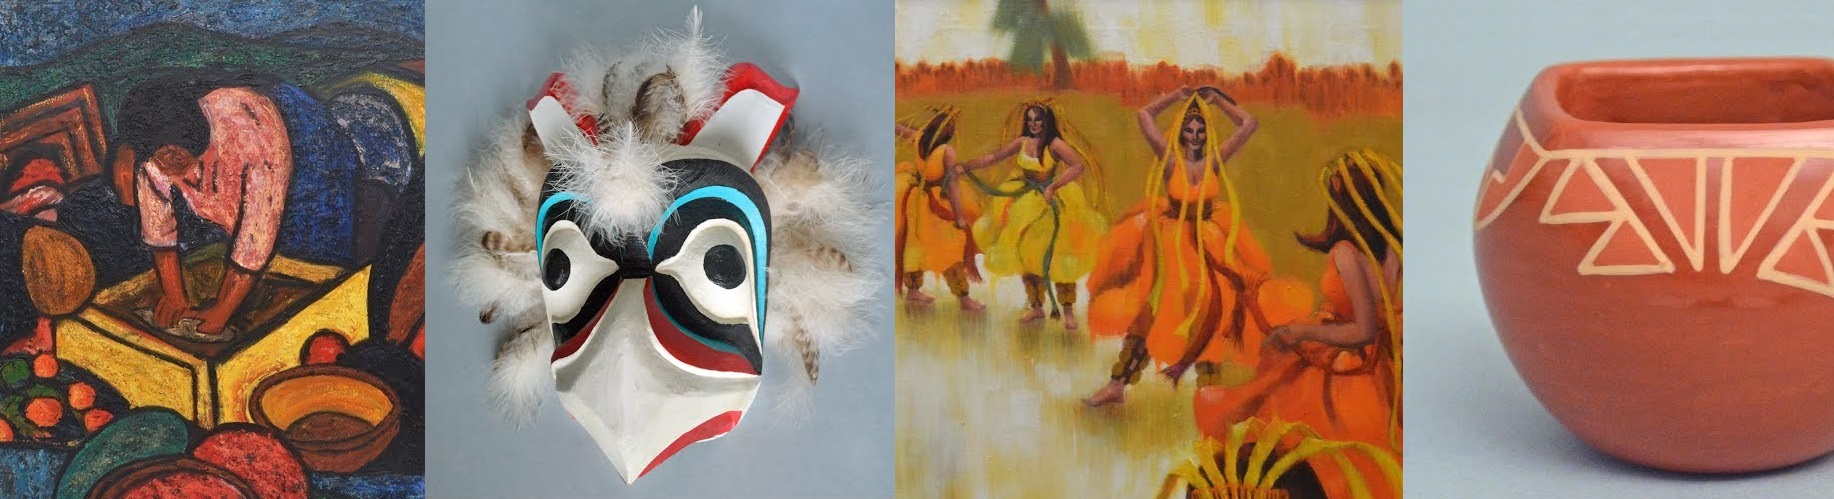 From left to right: "Woman Grinding Corn" by Howell Sonny Orr, Spotted Owl Mask by Jewell Praying Wolf James, "Preparing for the Performance" by Joan Hill, Red Polished Pot with Square Mouth by Anita Suazo.